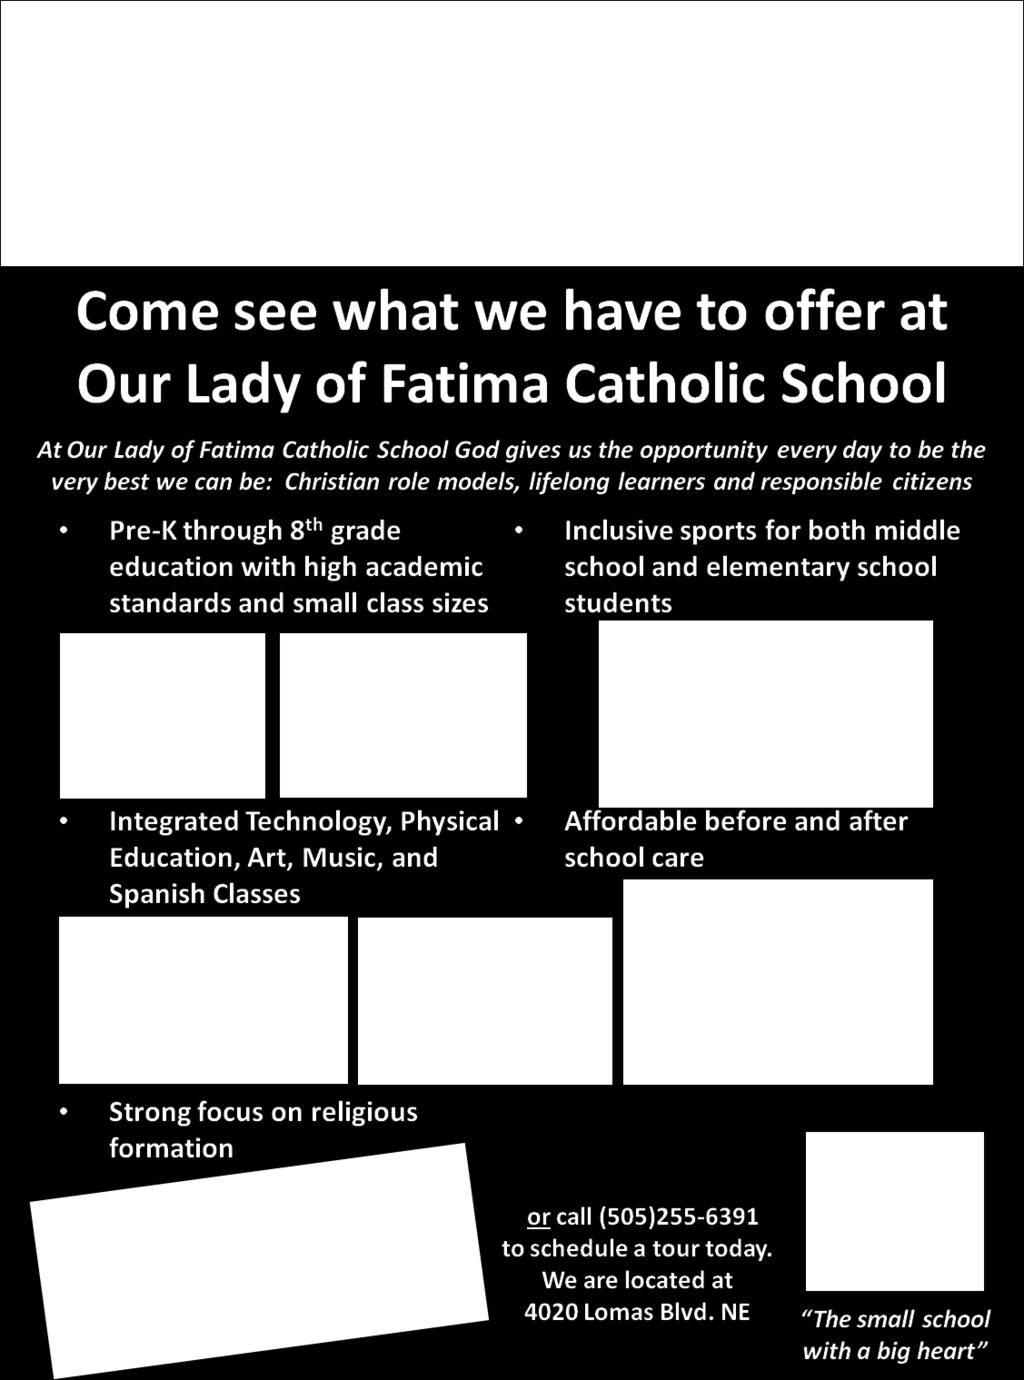 Melinda Mader, for more information about Our Lady of Fatima School and to arrange a personalized visit. The school office may be reached at 255-6391.